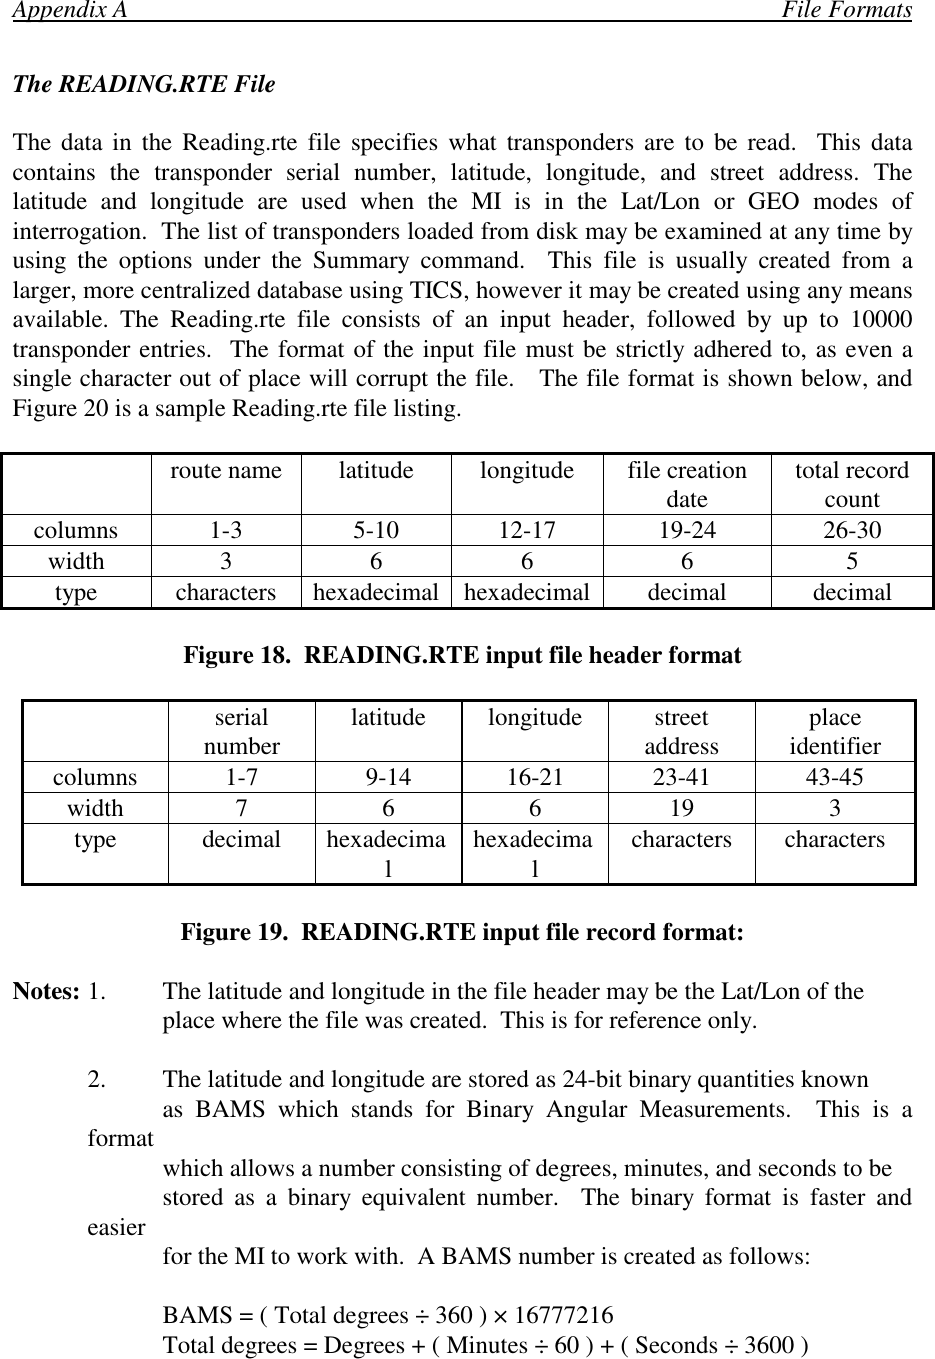 Appendix A                                                                                                         File FormatsThe READING.RTE FileThe data in the Reading.rte file specifies what transponders are to be read.  This datacontains the transponder serial number, latitude, longitude, and street address. Thelatitude and longitude are used when the MI is in the Lat/Lon or GEO modes ofinterrogation.  The list of transponders loaded from disk may be examined at any time byusing the options under the Summary command.  This file is usually created from alarger, more centralized database using TICS, however it may be created using any meansavailable. The Reading.rte file consists of an input header, followed by up to 10000transponder entries.  The format of the input file must be strictly adhered to, as even asingle character out of place will corrupt the file.   The file format is shown below, andFigure 20 is a sample Reading.rte file listing.route name latitude longitude file creationdate total recordcountcolumns 1-3 5-10 12-17 19-24 26-30width 3 6 6 6 5type characters hexadecimal hexadecimal decimal decimalFigure 18.  READING.RTE input file header formatserialnumber latitude longitude streetaddress placeidentifiercolumns 1-7 9-14 16-21 23-41 43-45width 7 6 6 19 3type decimal hexadecimalhexadecimalcharacters charactersFigure 19.  READING.RTE input file record format:Notes: 1. The latitude and longitude in the file header may be the Lat/Lon of theplace where the file was created.  This is for reference only.2. The latitude and longitude are stored as 24-bit binary quantities knownas BAMS which stands for Binary Angular Measurements.  This is aformat which allows a number consisting of degrees, minutes, and seconds to bestored as a binary equivalent number.  The binary format is faster andeasier for the MI to work with.  A BAMS number is created as follows:BAMS = ( Total degrees ÷ 360 ) × 16777216Total degrees = Degrees + ( Minutes ÷ 60 ) + ( Seconds ÷ 3600 )